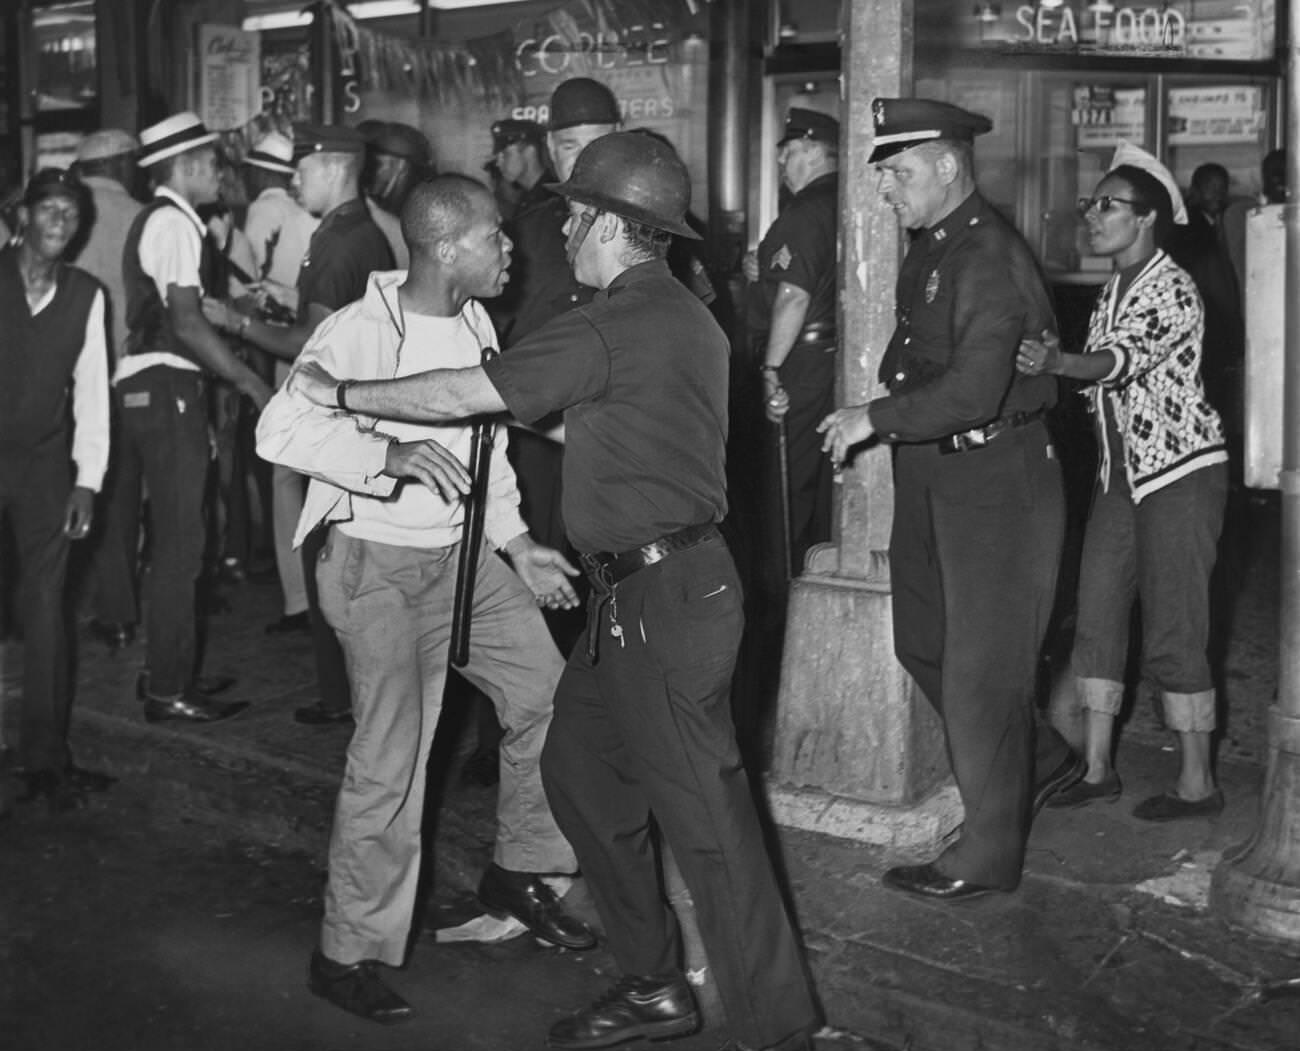 Policemen Confront A Group After A Night Of Rioting In Brooklyn, July 21, 1964.